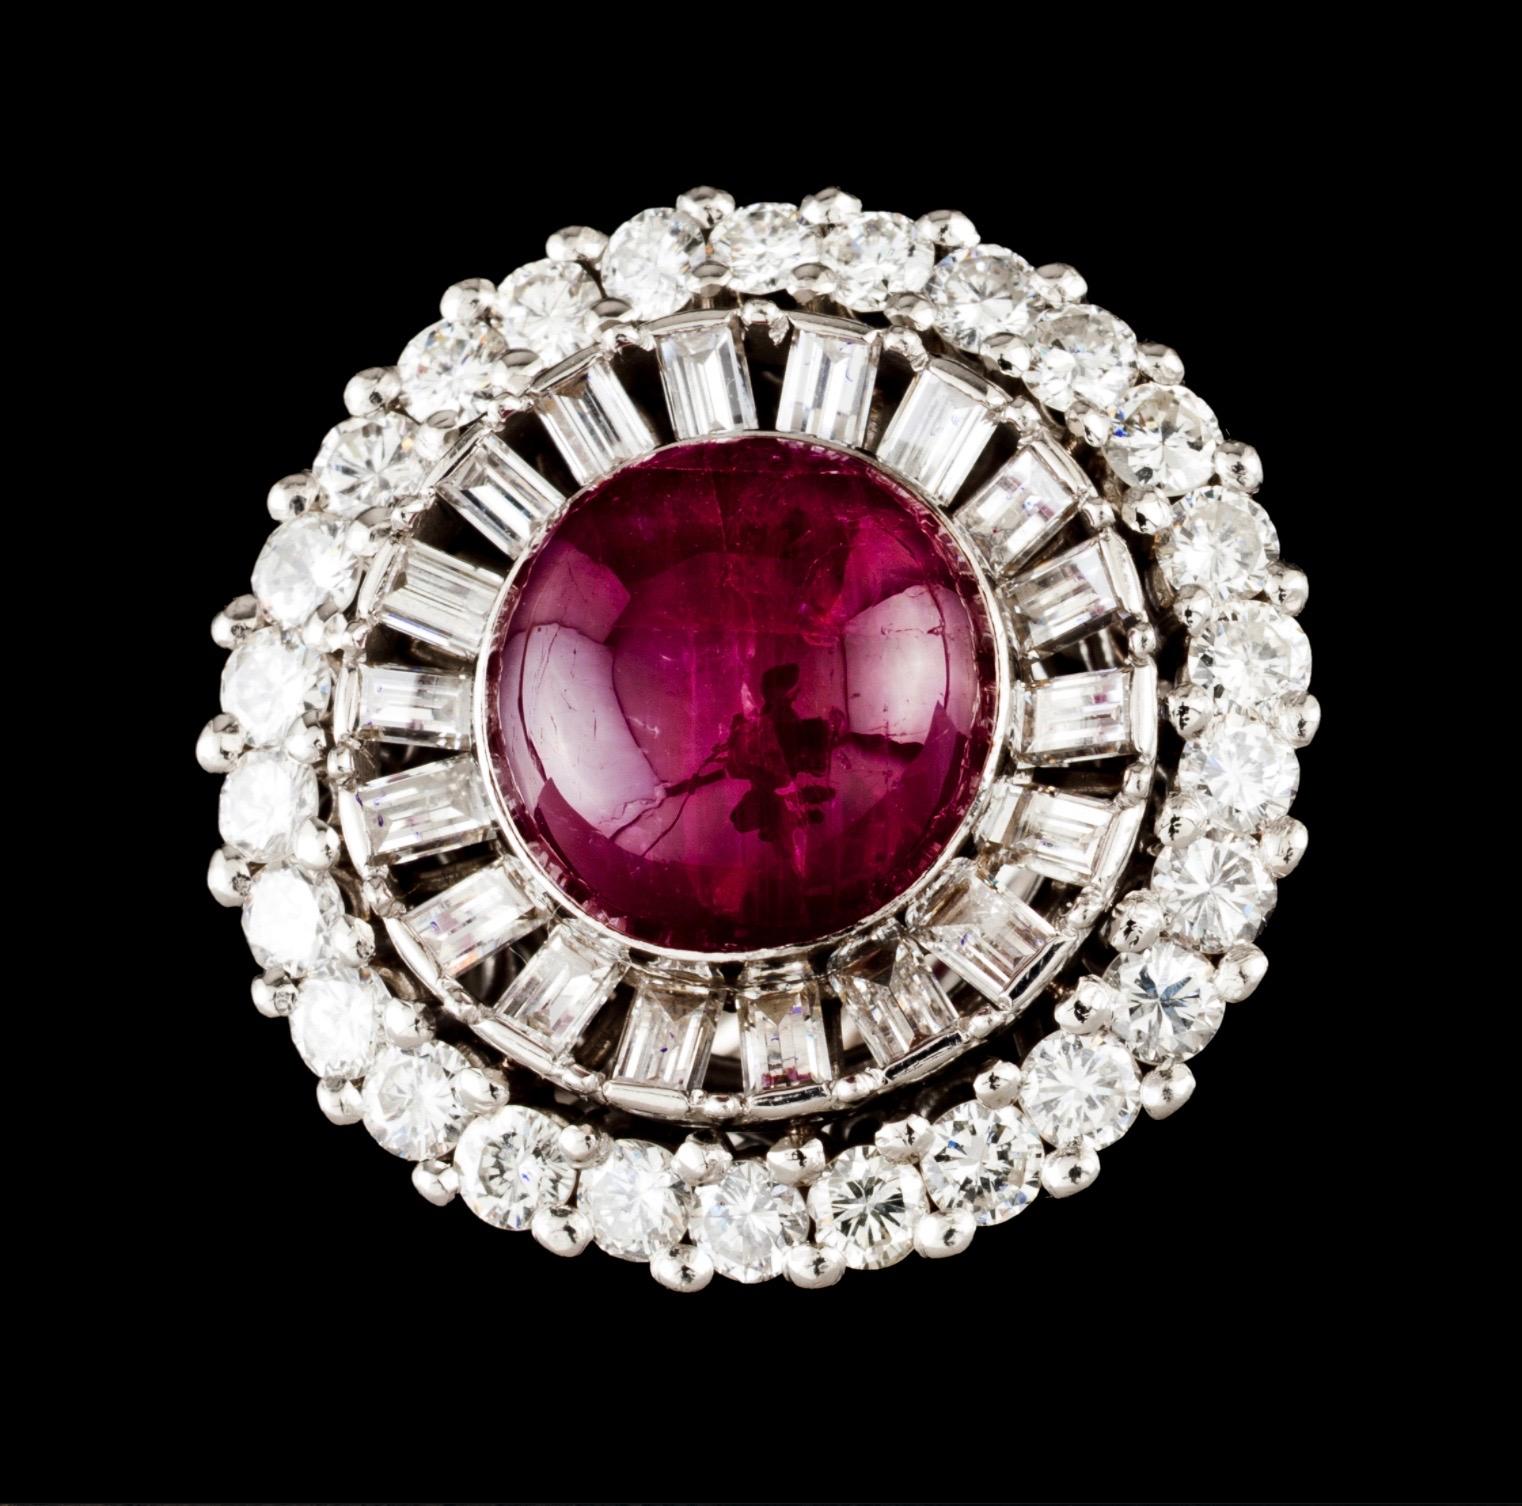 Mid-Century natural star ruby cabochon and diamond ballerina cocktail ring in platinum and white gold, Europe, 1950s/1960s. Of circular shape, this ring features a ruby cabochon bezel-set to the center, surrounded by a row of 18 channel-set